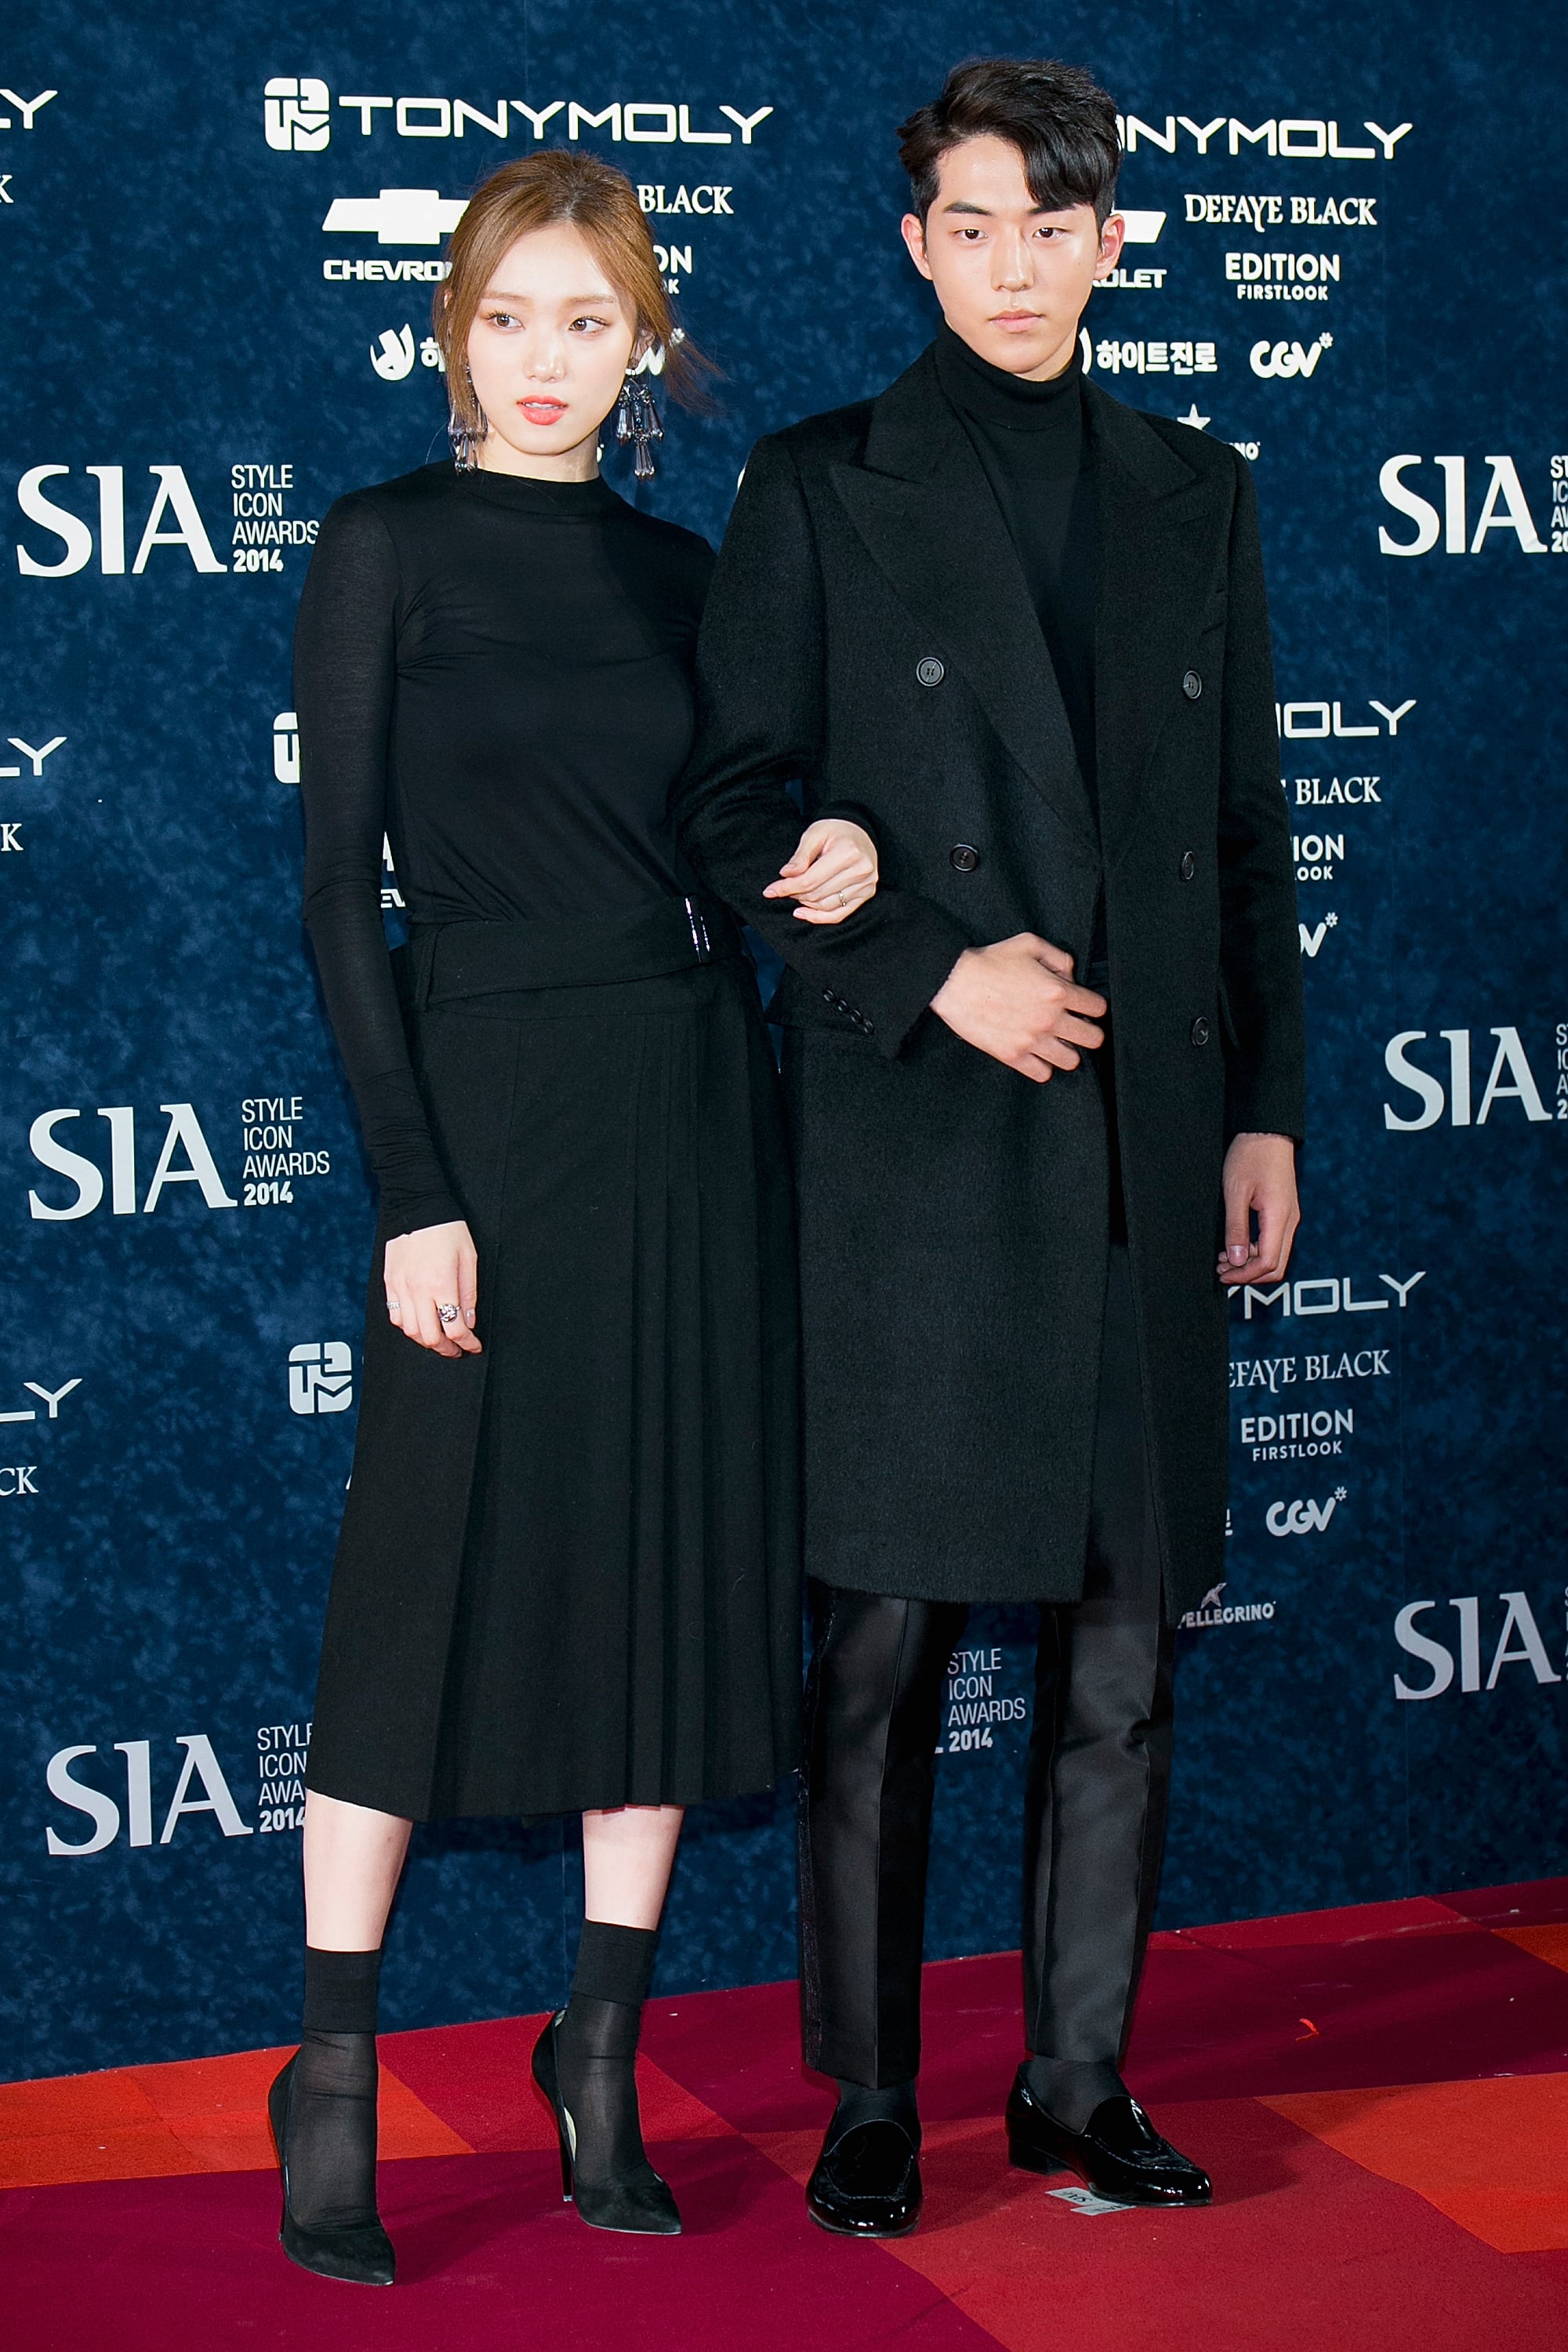 Seoul, South Korea-October 28: (LR) Korean actors Lee Sung Kyung and Nam Joo Hyuk (Nam Joo Hyuk) will be awarded the DDP 2014 Style Icon Awards in Seoul, South Korea on October 28, 2014. I will attend. (Photo courtesy of Han Myung-Gu / WireImage)